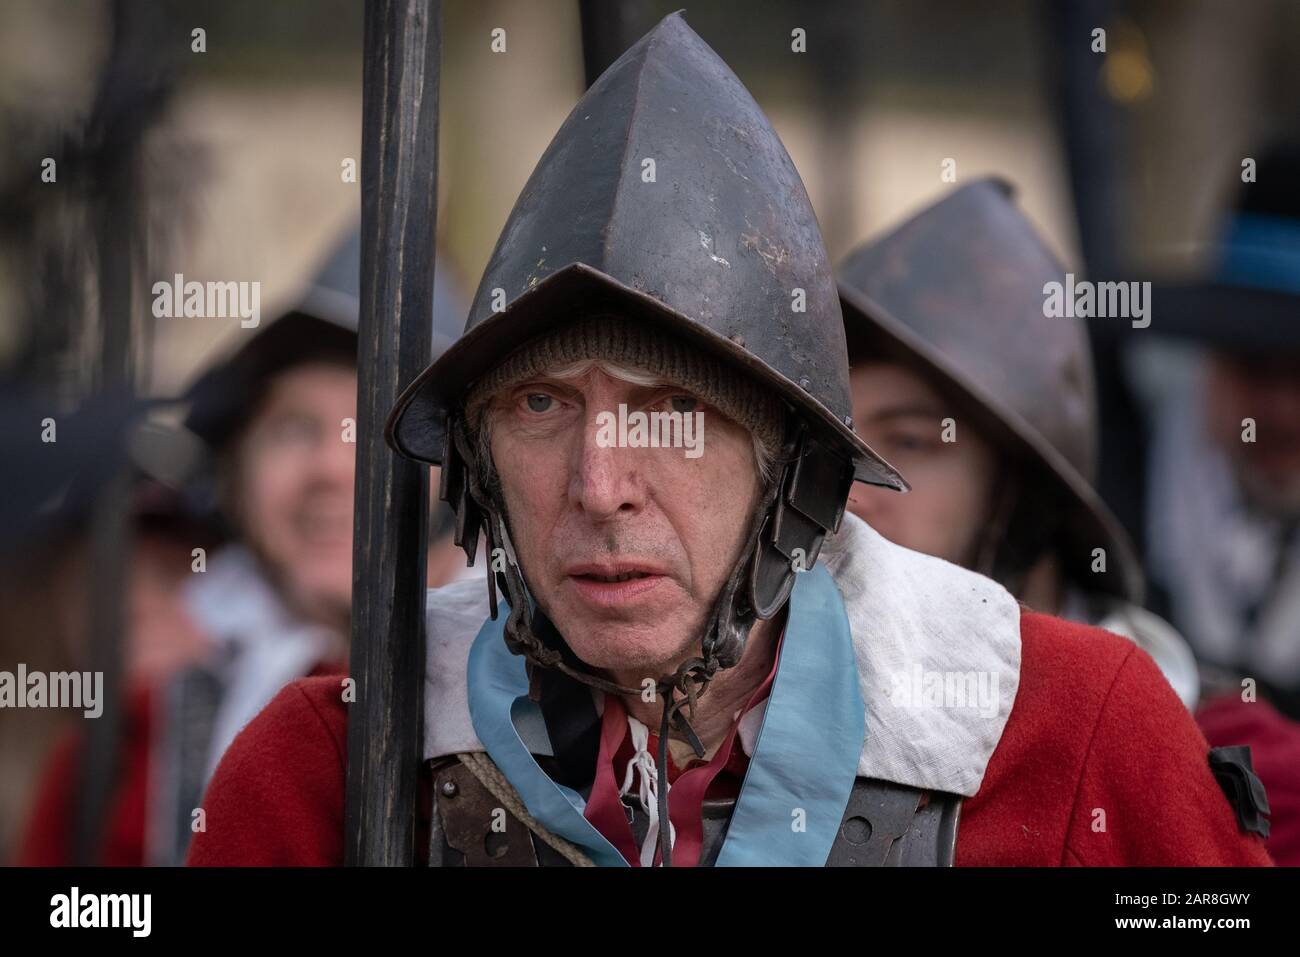 Annual re-enactment of King Charles I execution parade by the English Civil War Society (ECWS) in London, UK. Stock Photo